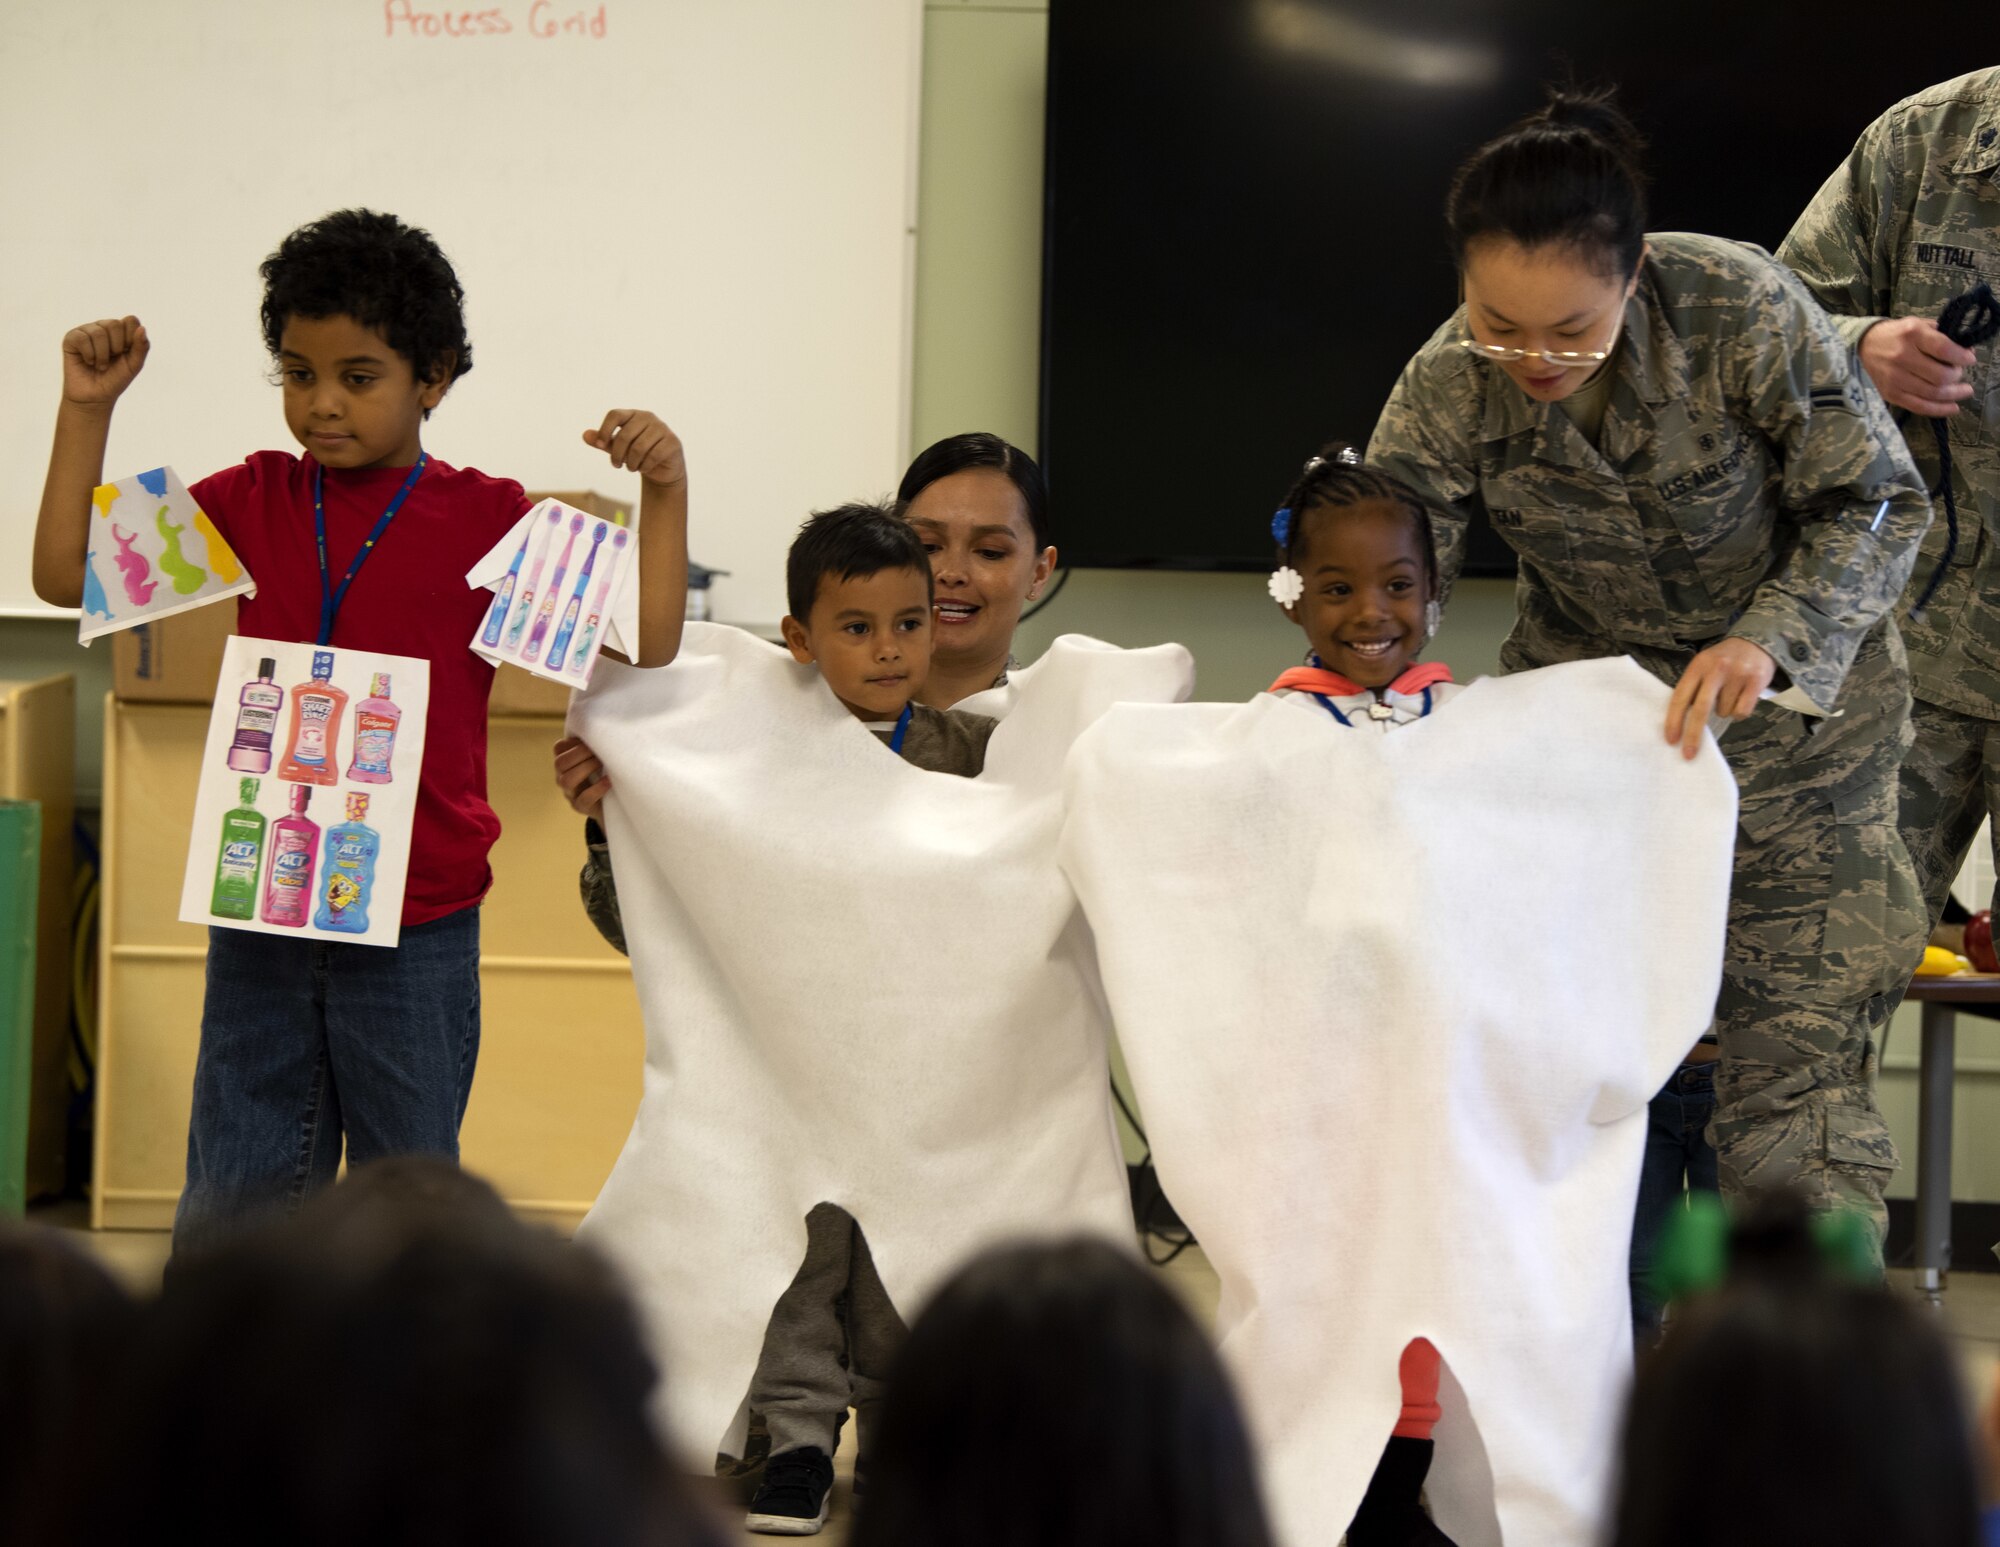 U.S. Air Force Airman 1st Class Yun Tan, 60th Dental Squadron dental assistant, adjusts a tooth costume on a student Feb. 20, 2019, at Mary Bird Elementary School, Fairfield, California. The 60th Dental Squadron visited four schools to educate more than 1300 students on dental health. (U.S. Air Force photo by Airman 1st Class Jonathon Carnell)